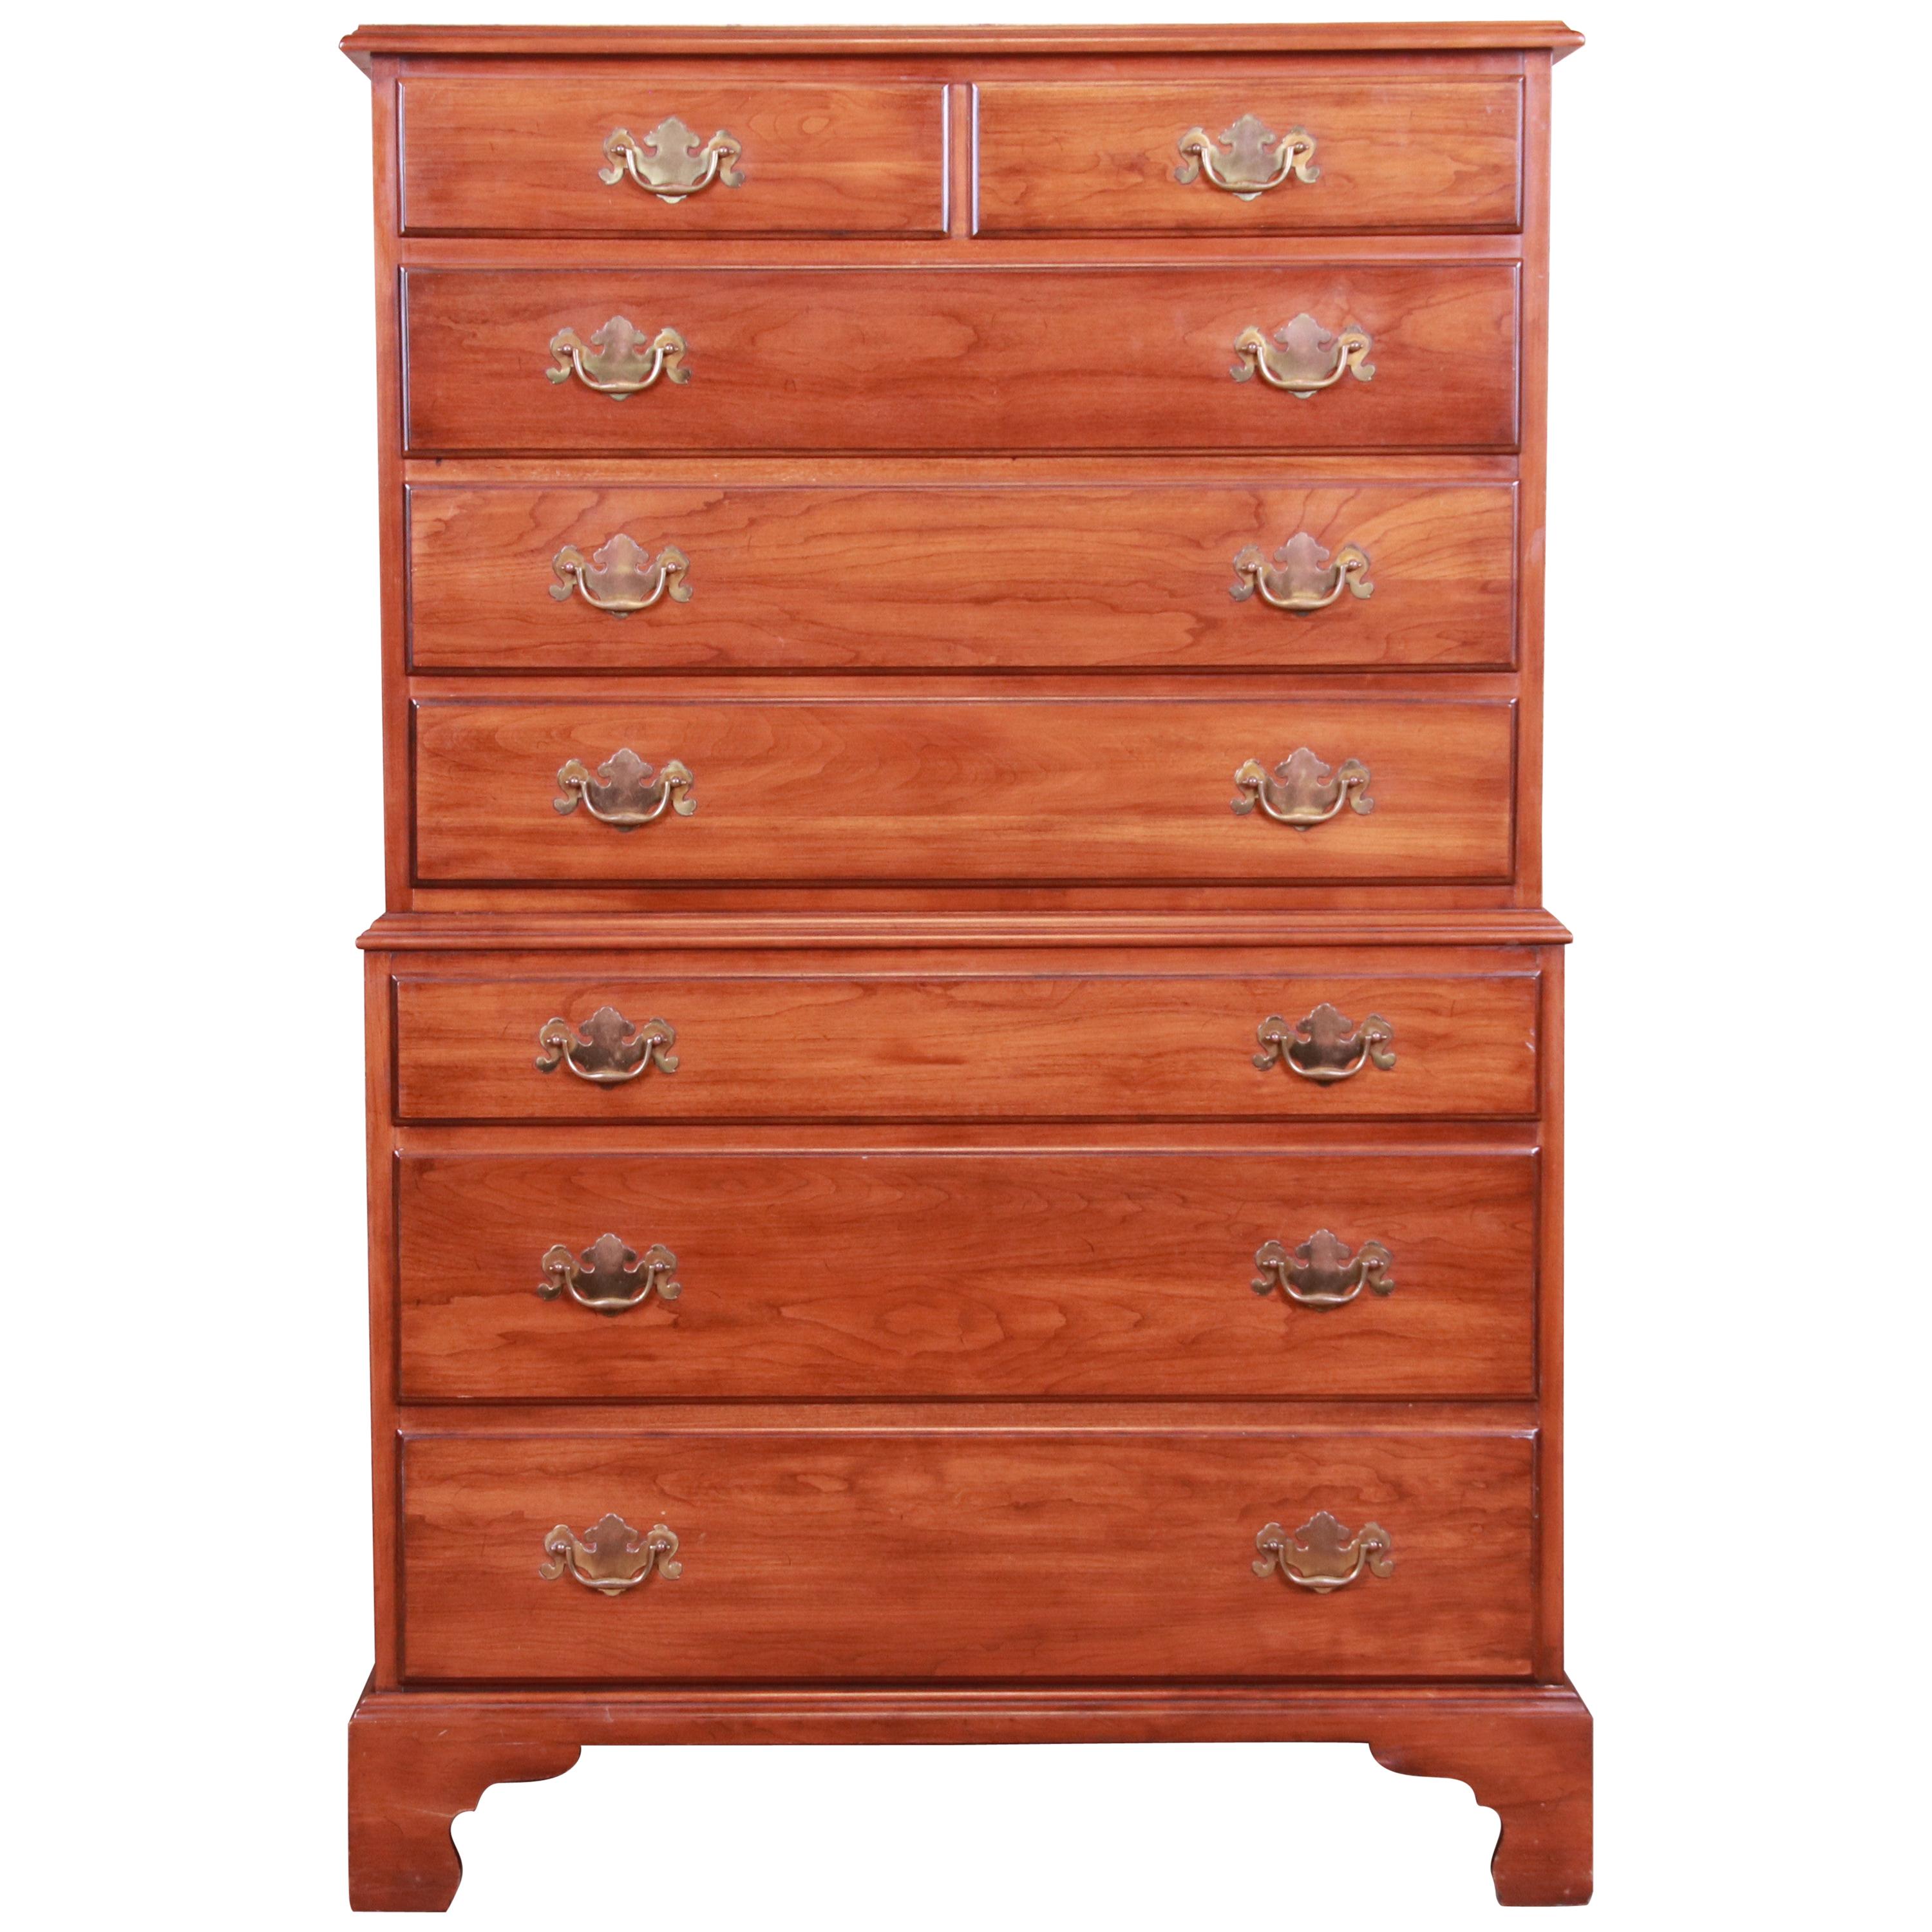 at Bachelors stanley, Goddard craftsman stanley collection by stanley Cherry Craftsman American craftsman collection chest bachelor 1stDibs american Sale Stanley Chest furniture, Dresser For american | Blockfront by the furniture